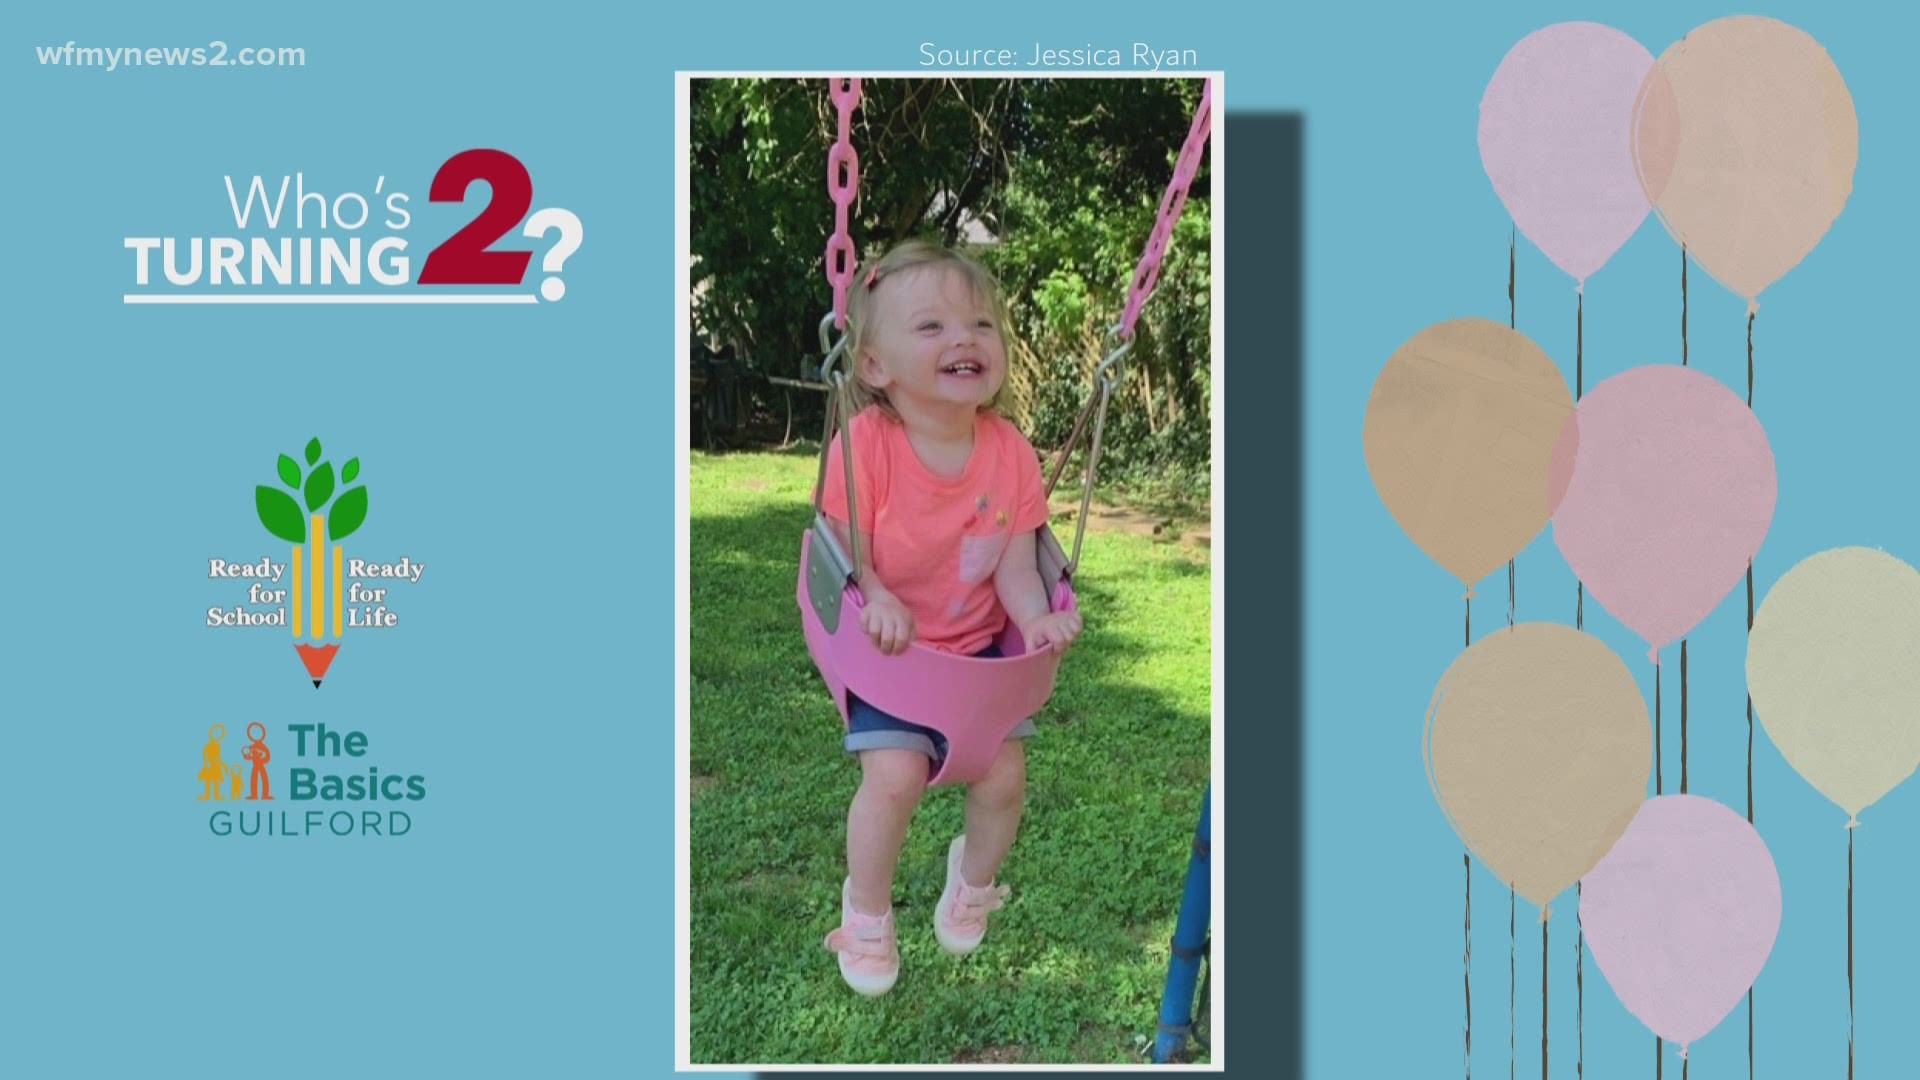 Time to give some shout-outs to the latest round of toddlers celebrating a 2nd birthday!